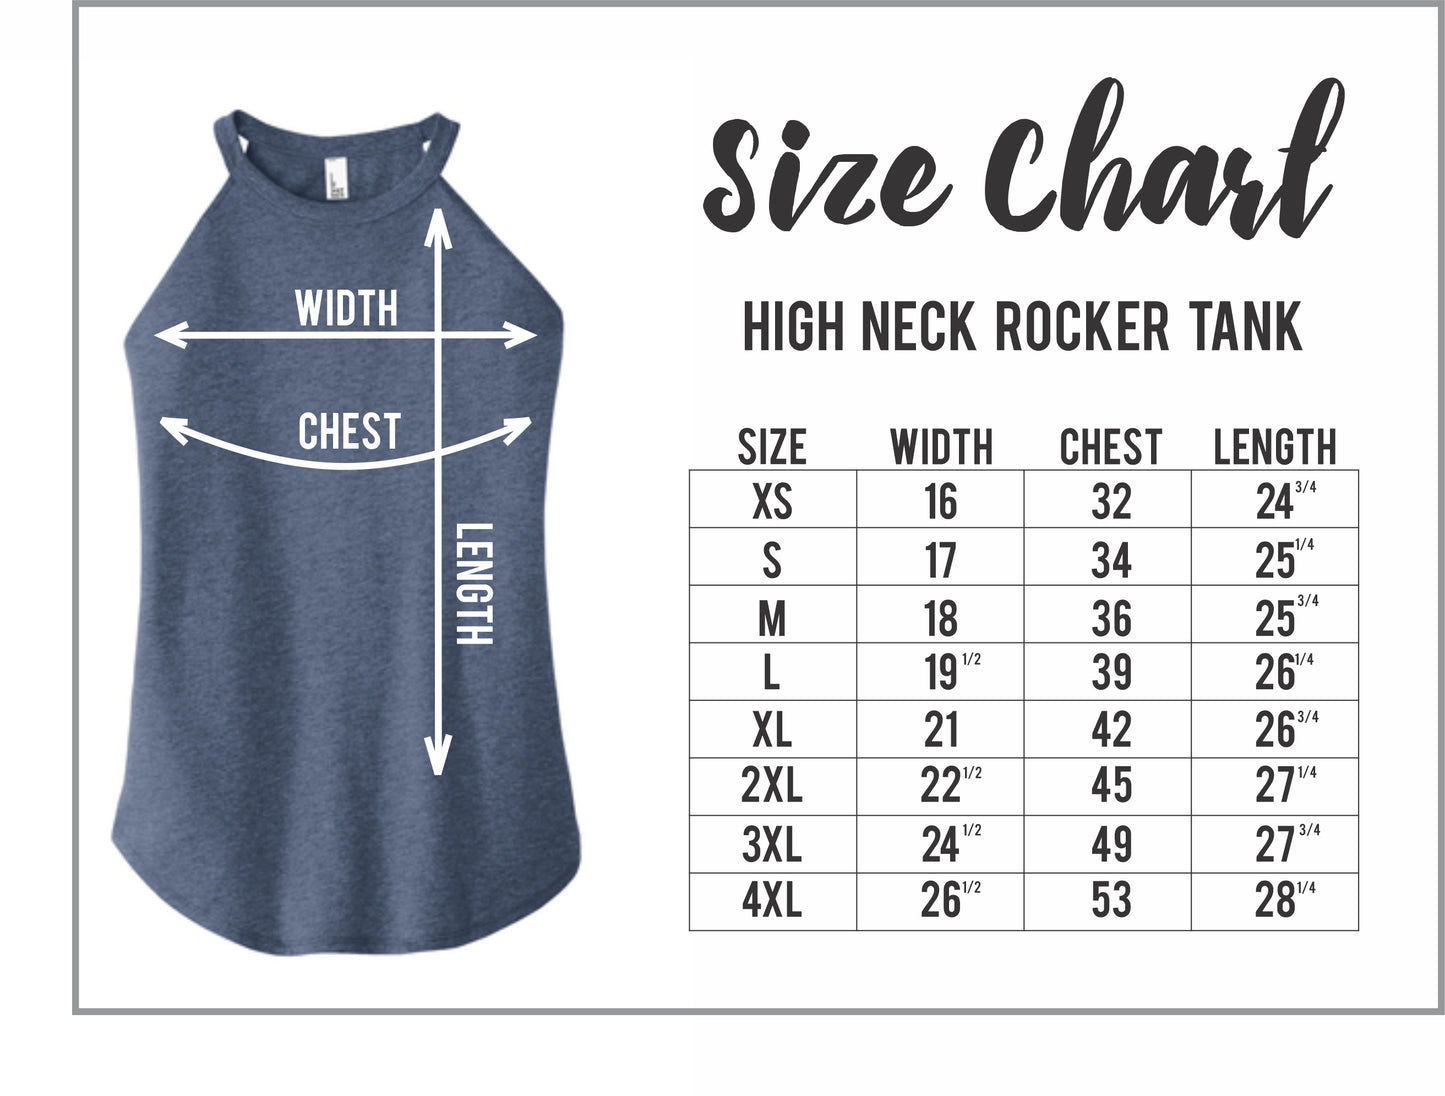 One Day Closer One Day Stronger - High Neck Rocker Tank